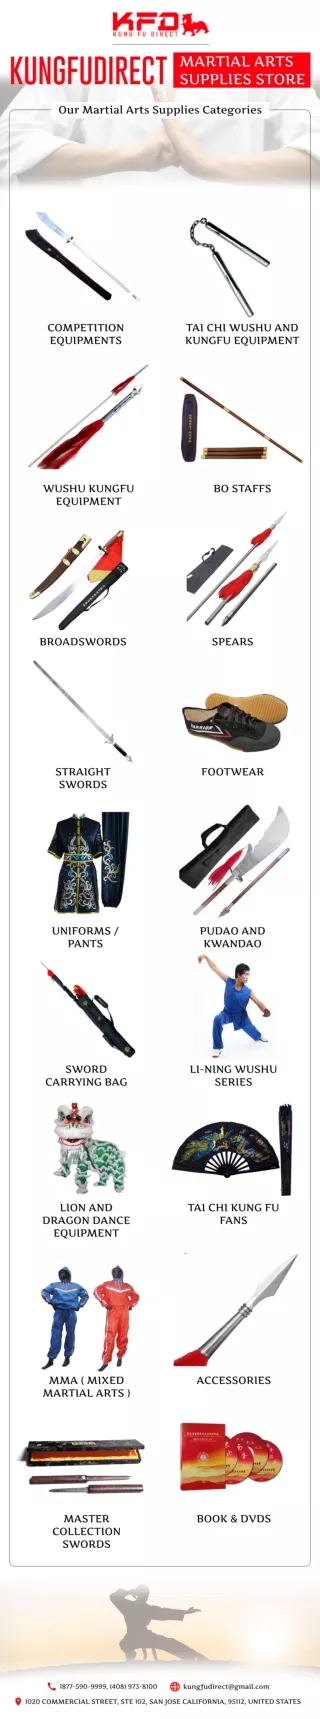 Infographic:- Kungfu Direct Martial Arts Supplies Store